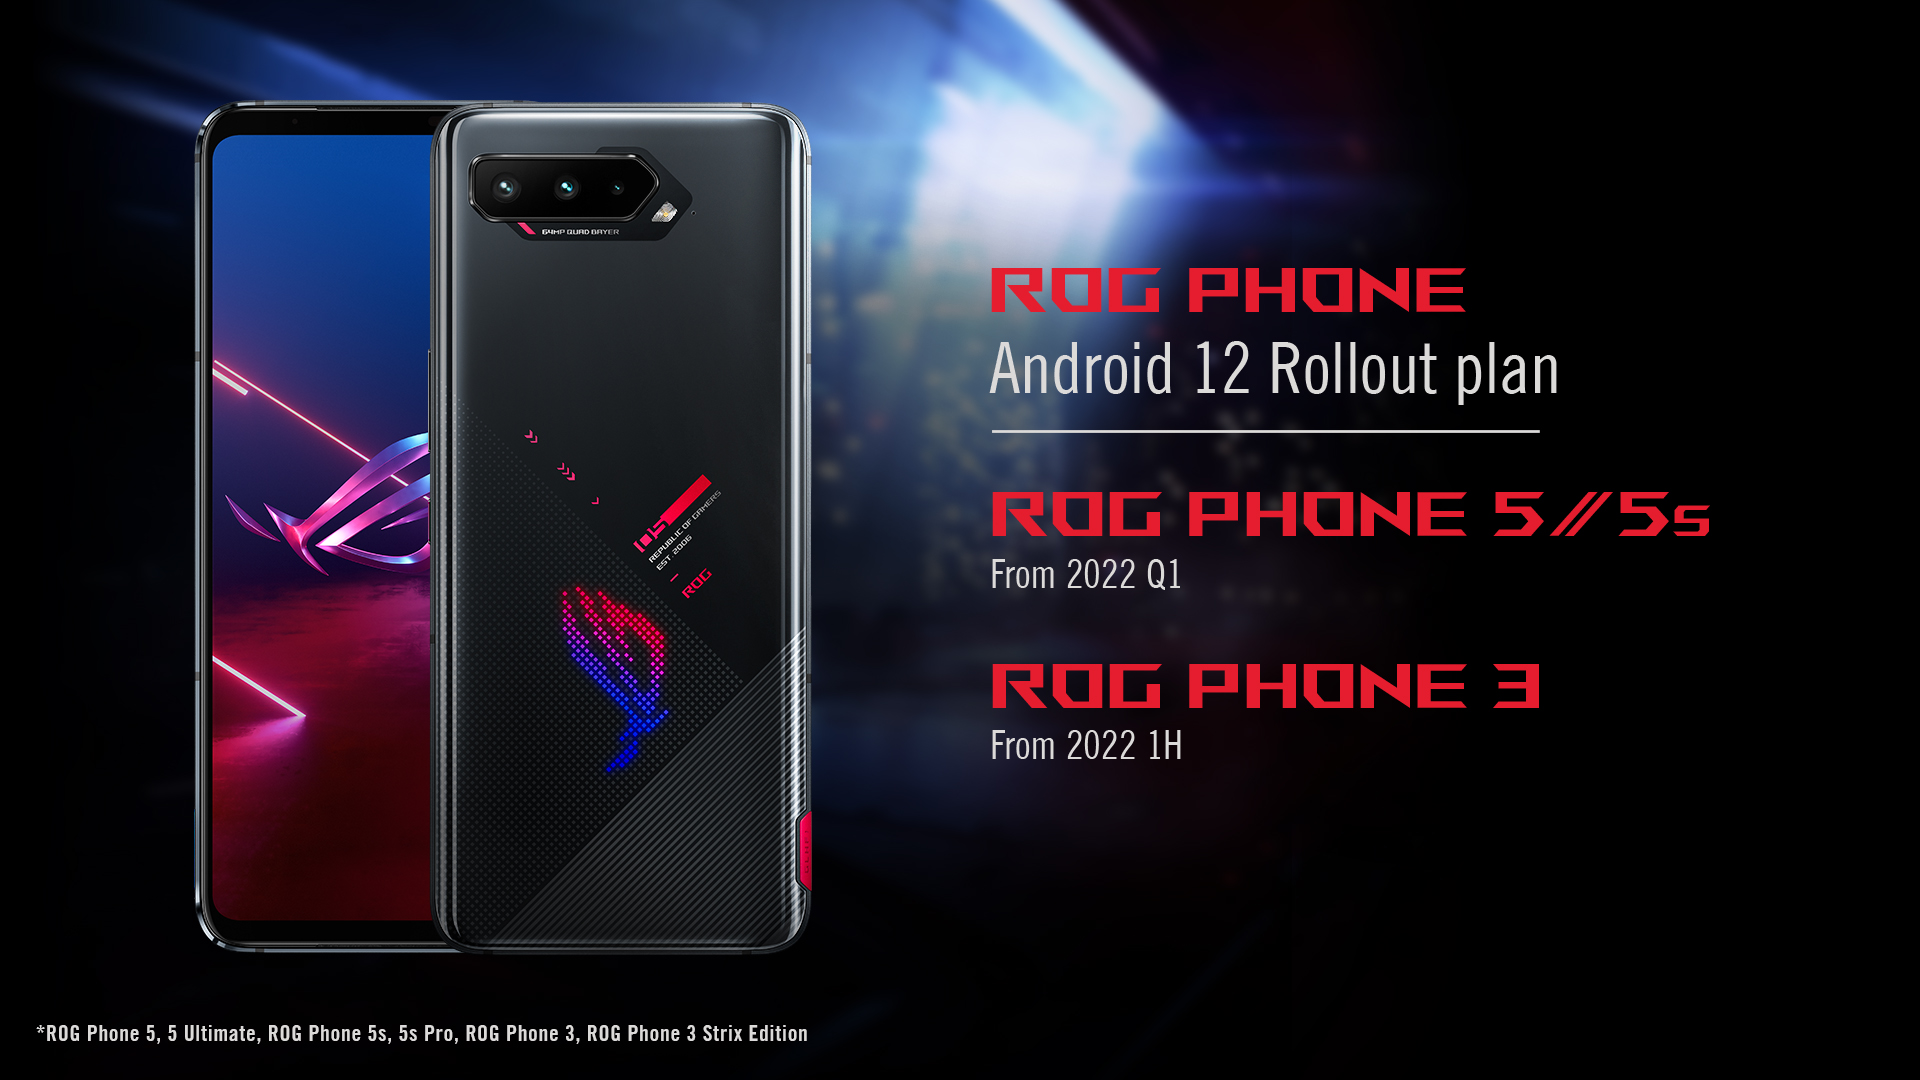 ROG Phone Android